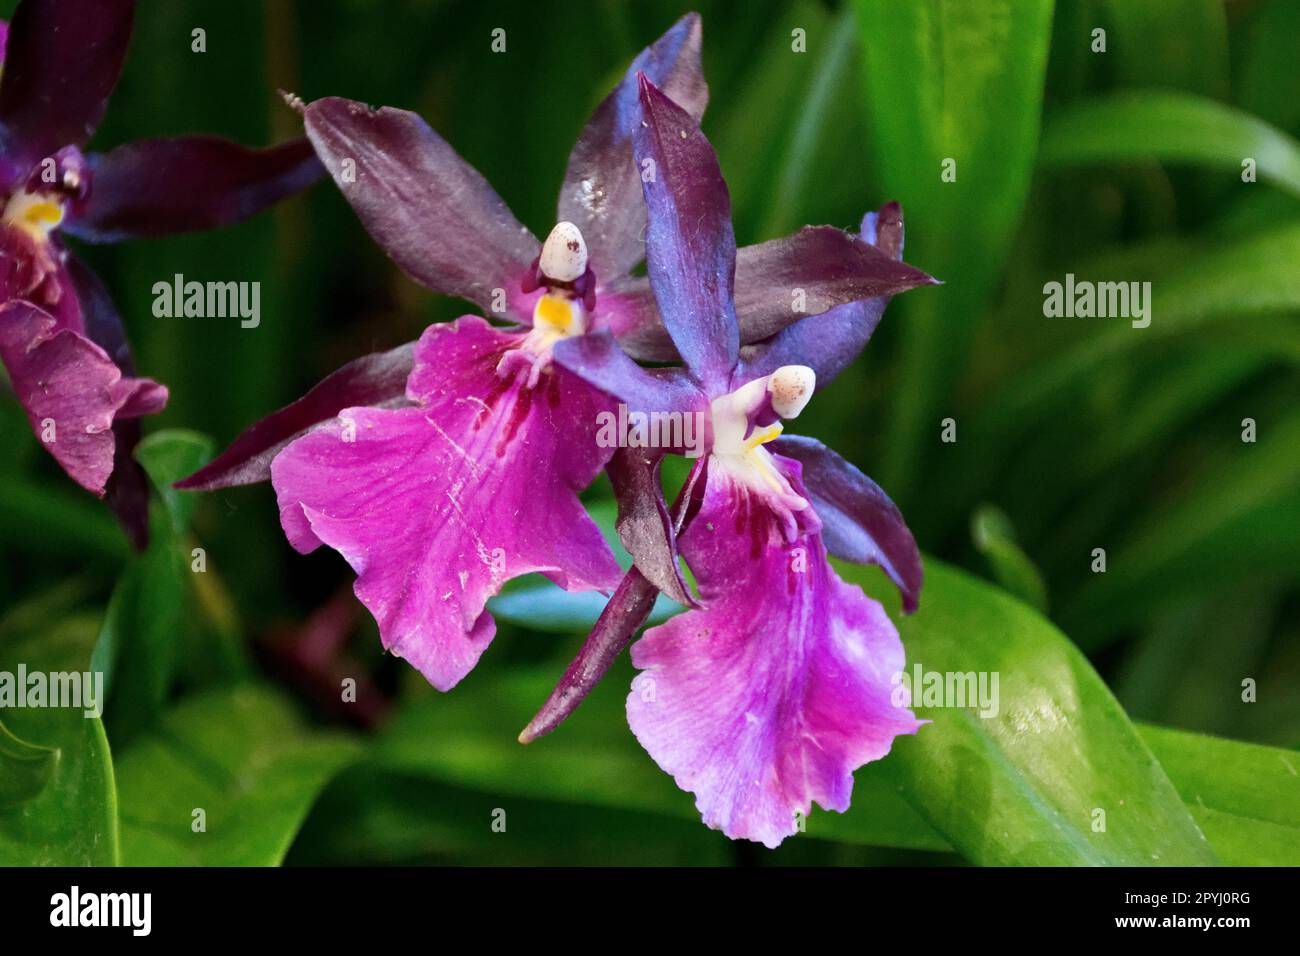 Beautiful vivid purple Vanda orchid flowers with green leaves blossom in summer and autumn Stock Photo